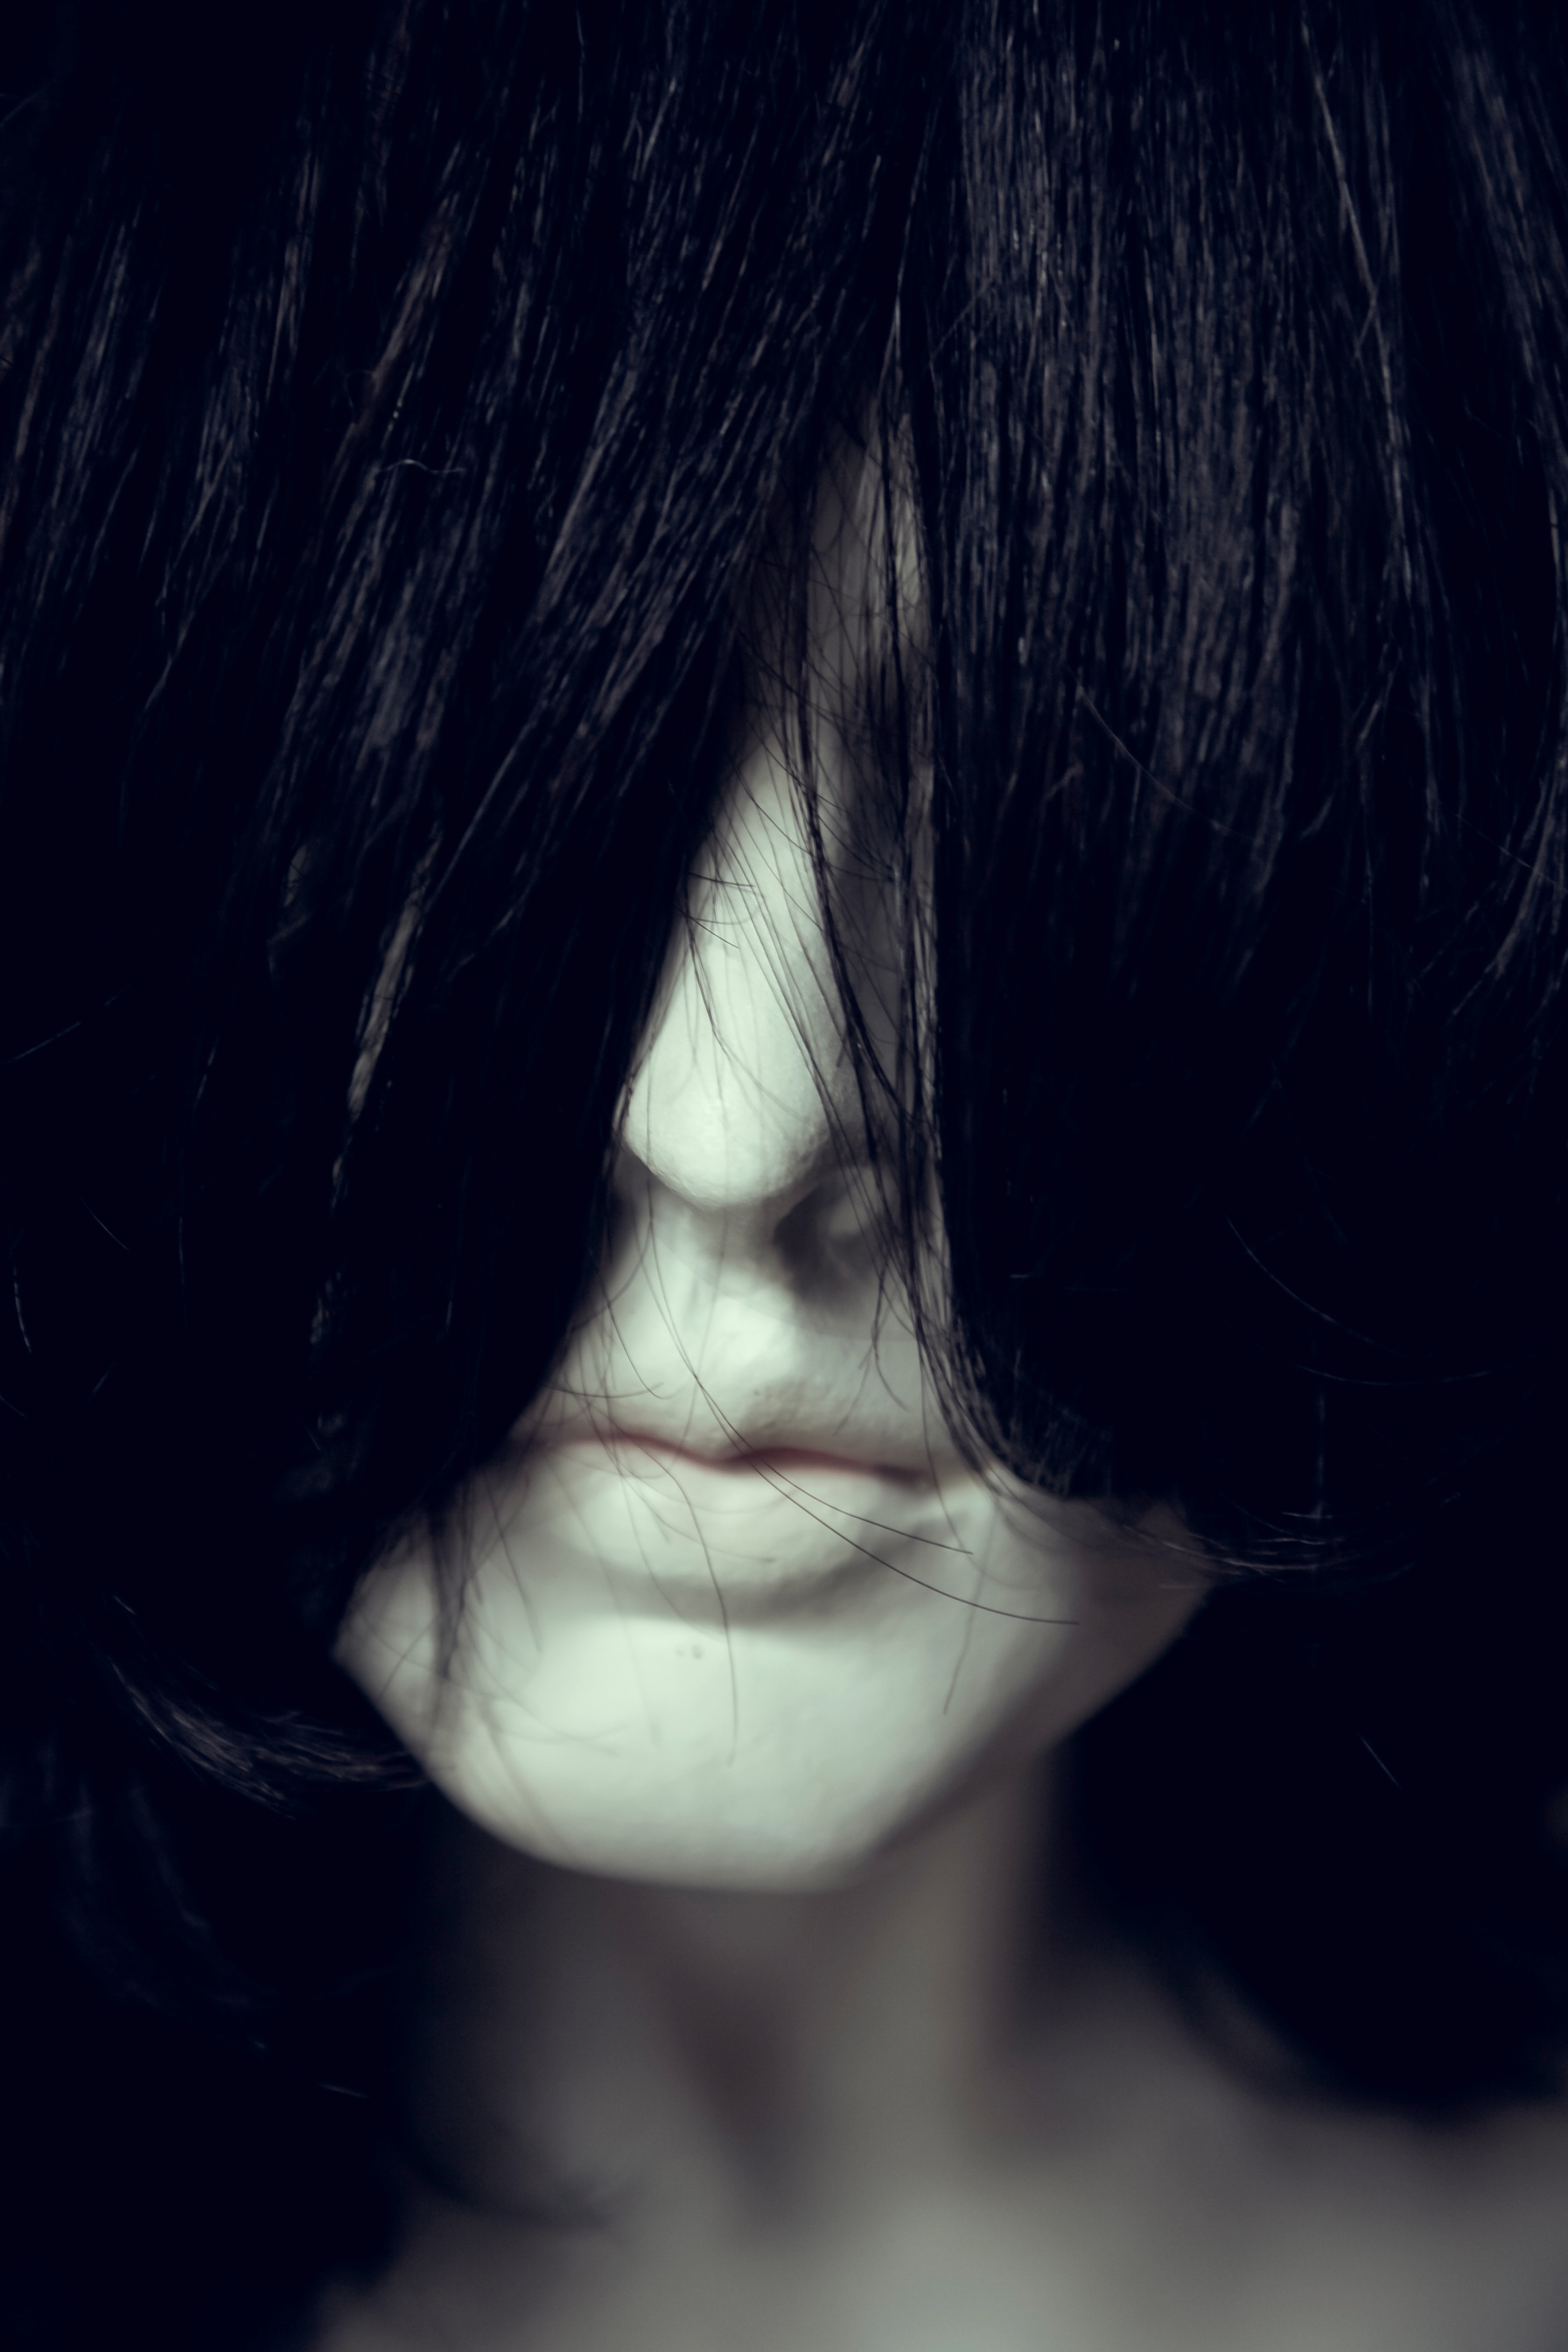 Woman face covered with hair photo